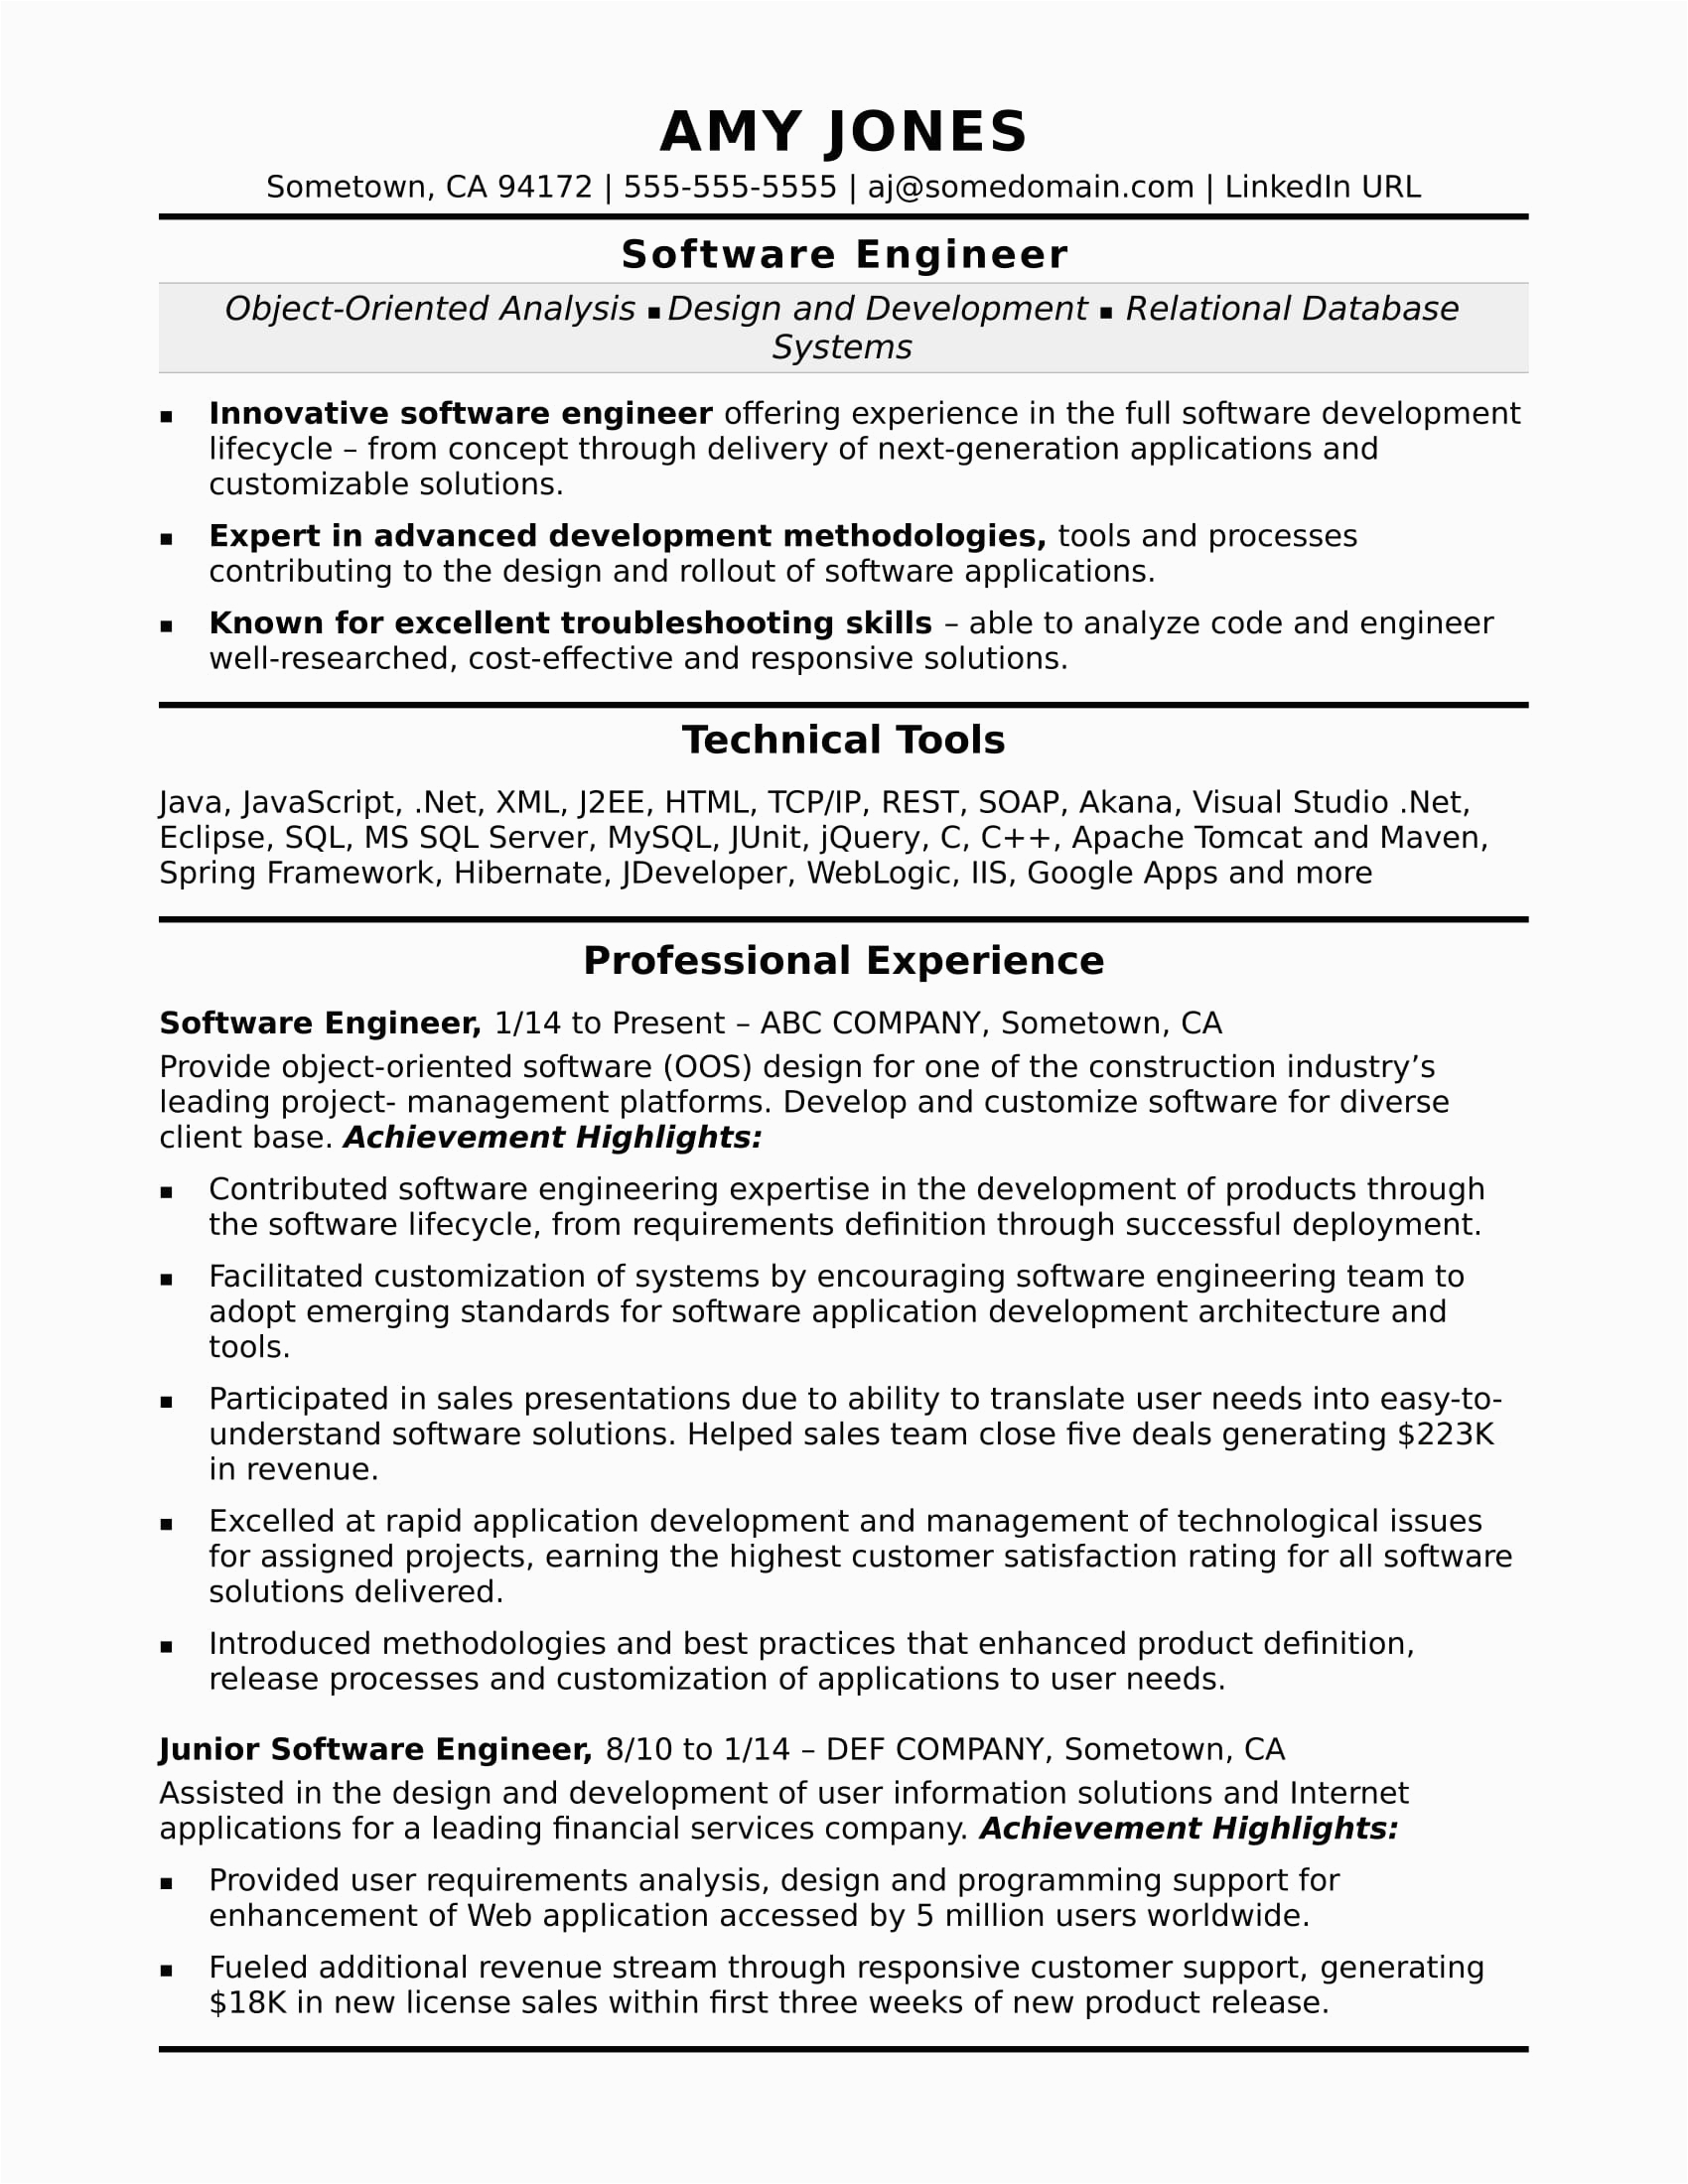 Experience Resume Samples for software Engineer software Engineer Resume